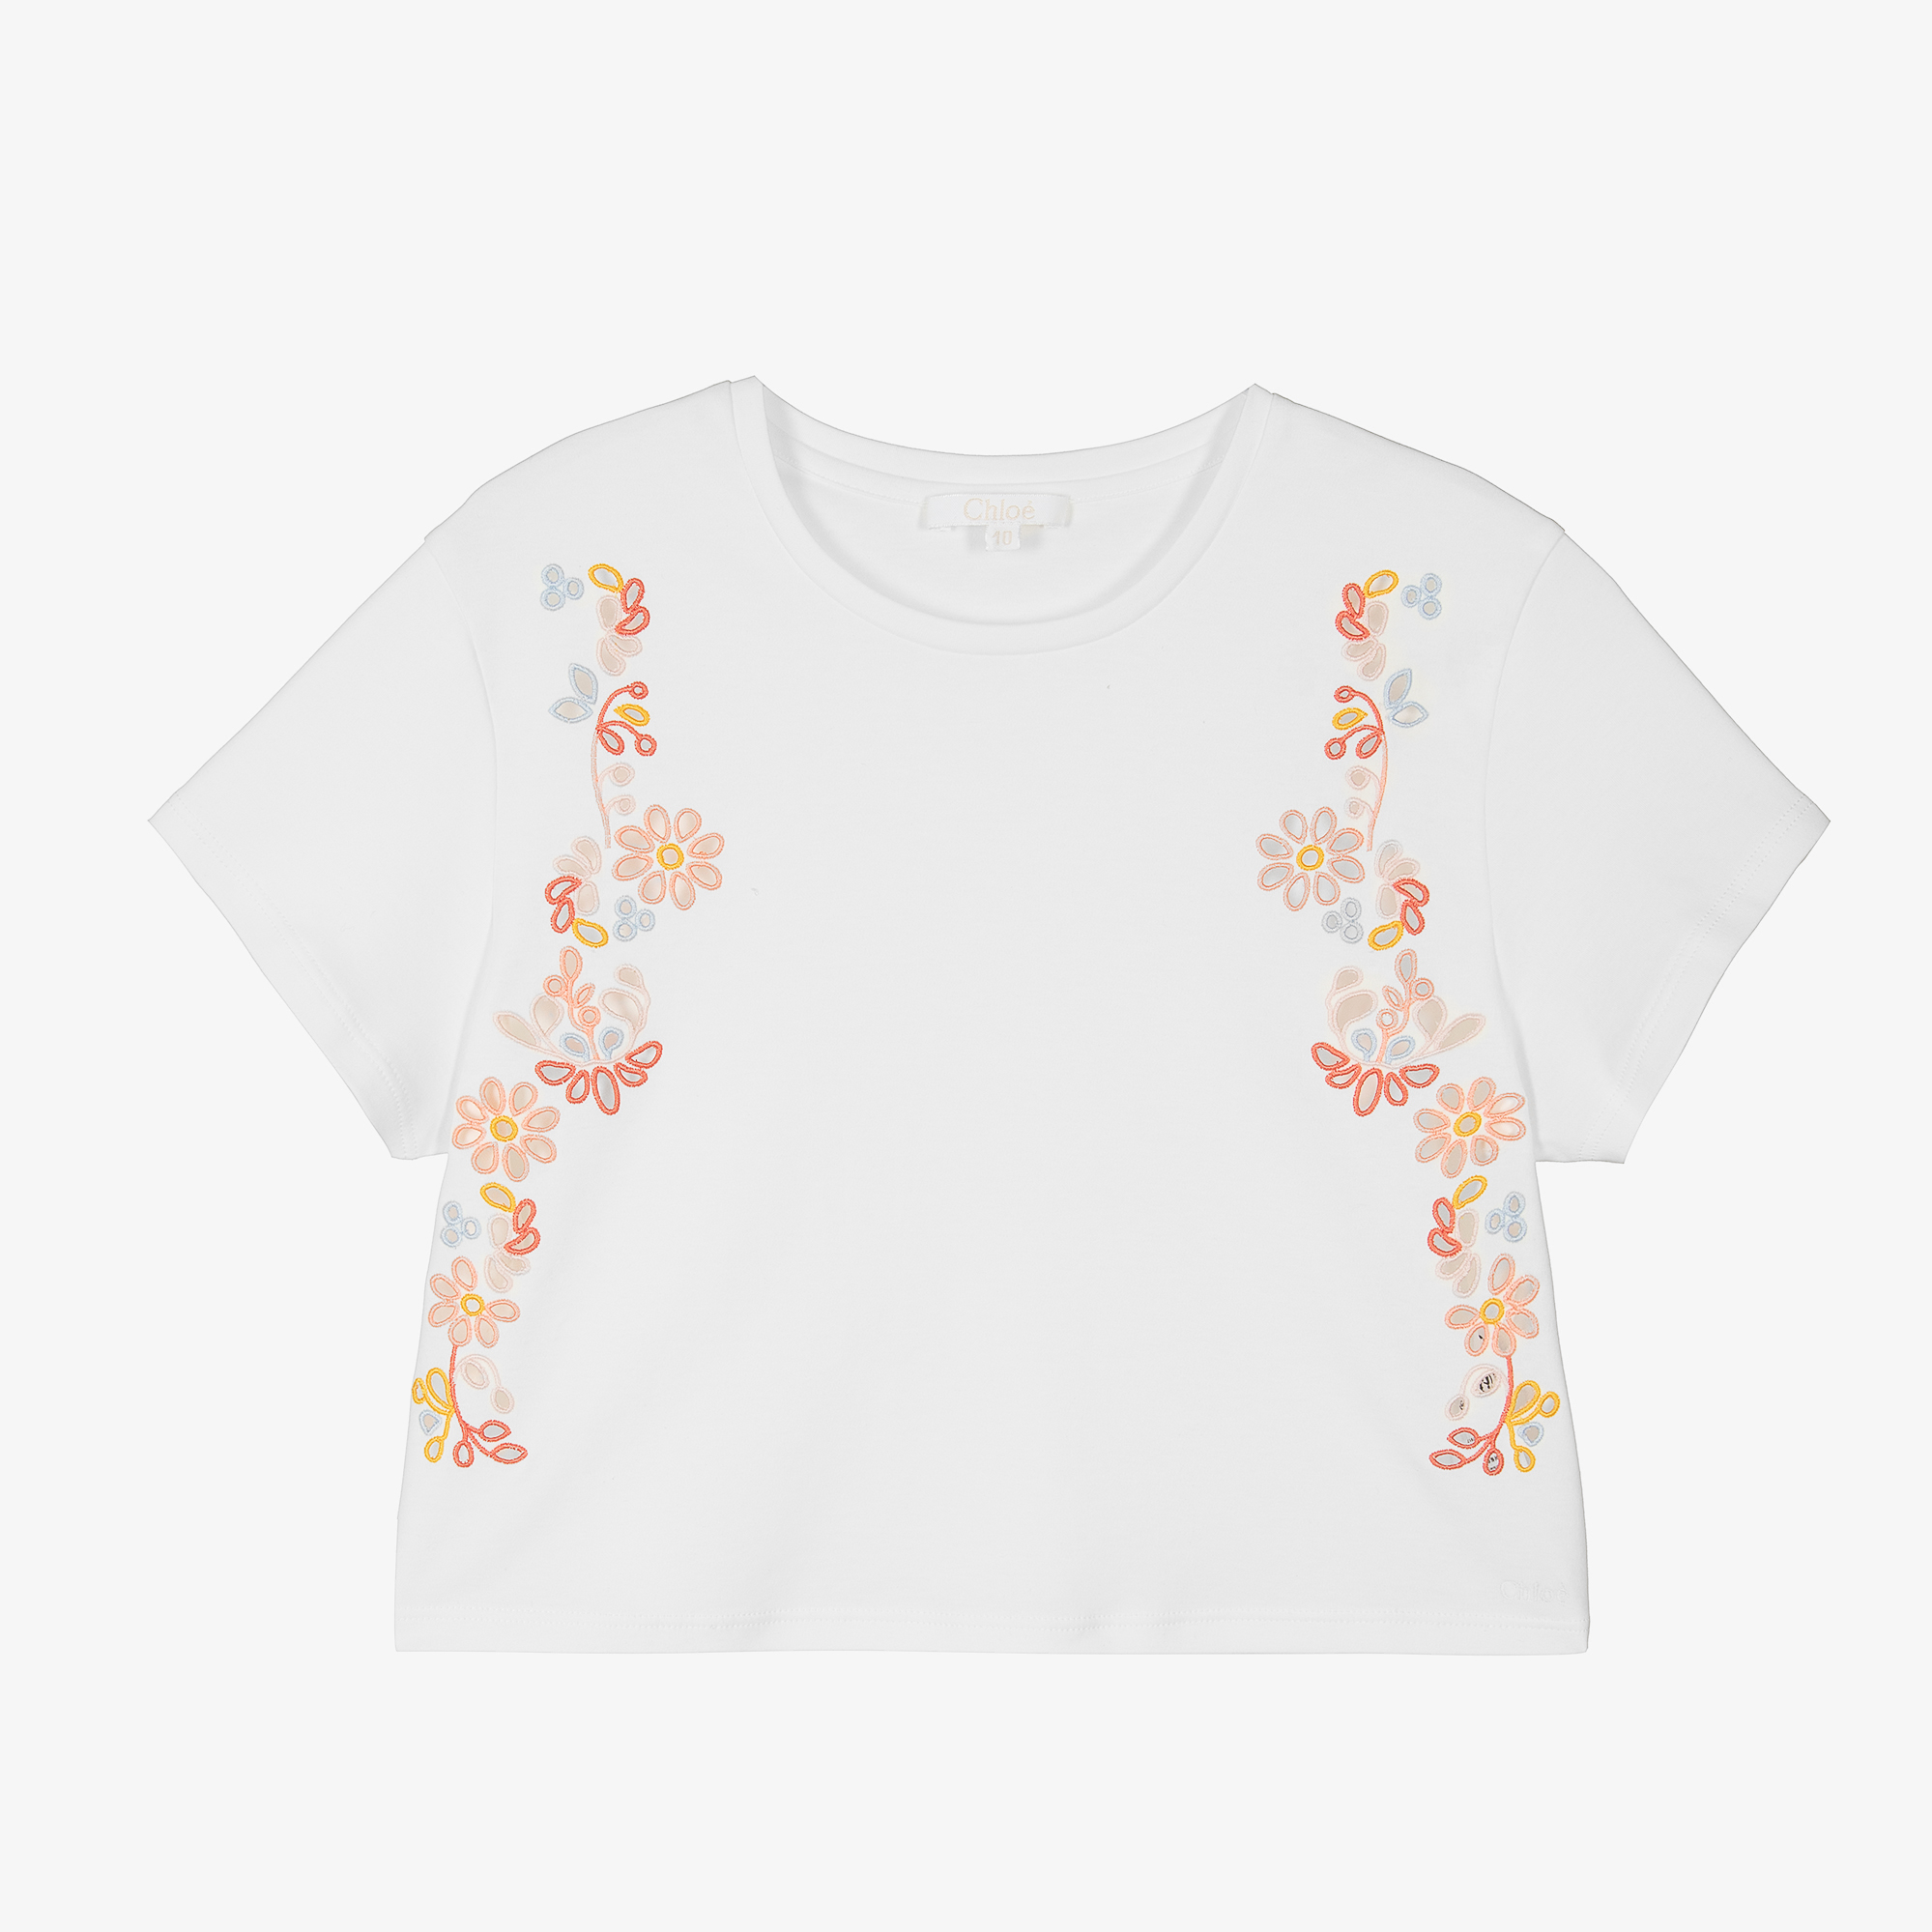 Cutwork Floral Embroidered Top Black, Tops & T-shirts